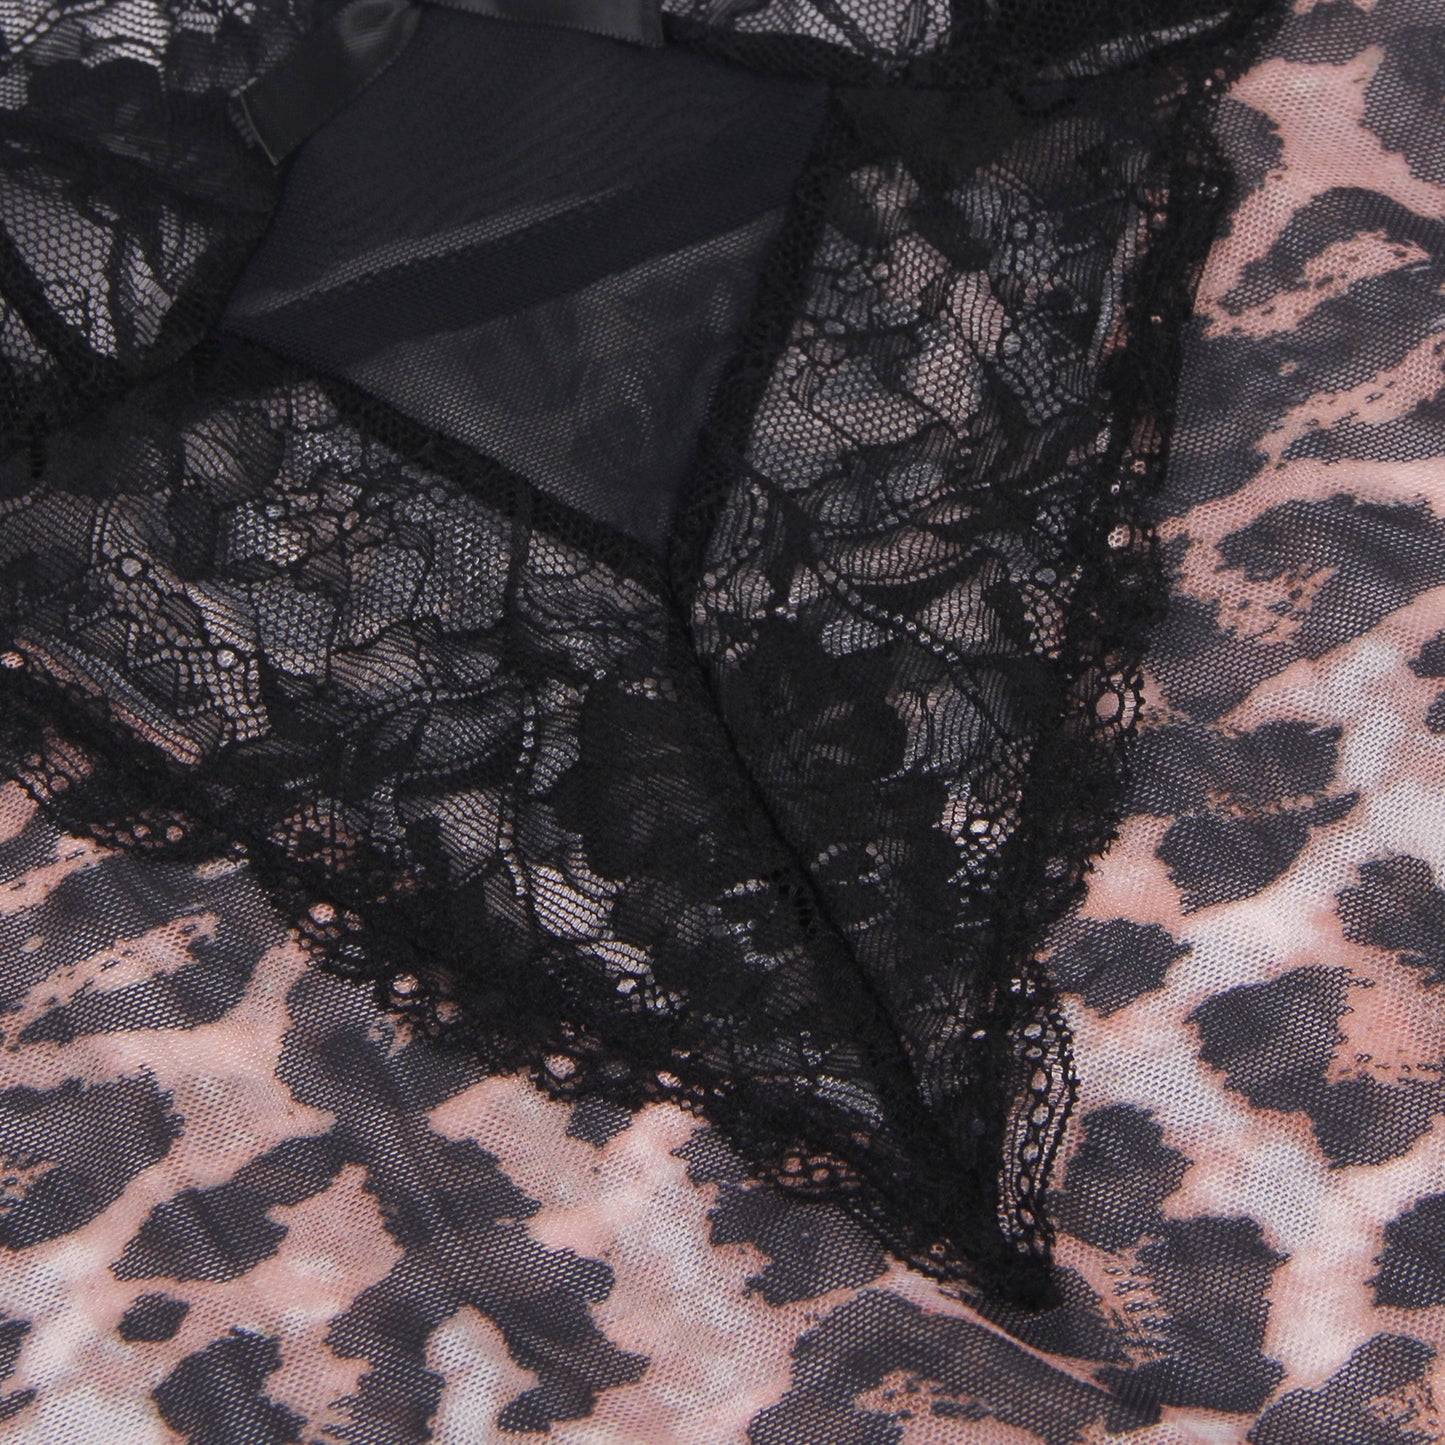 Loveangels Leopard And Black Lace Teddy